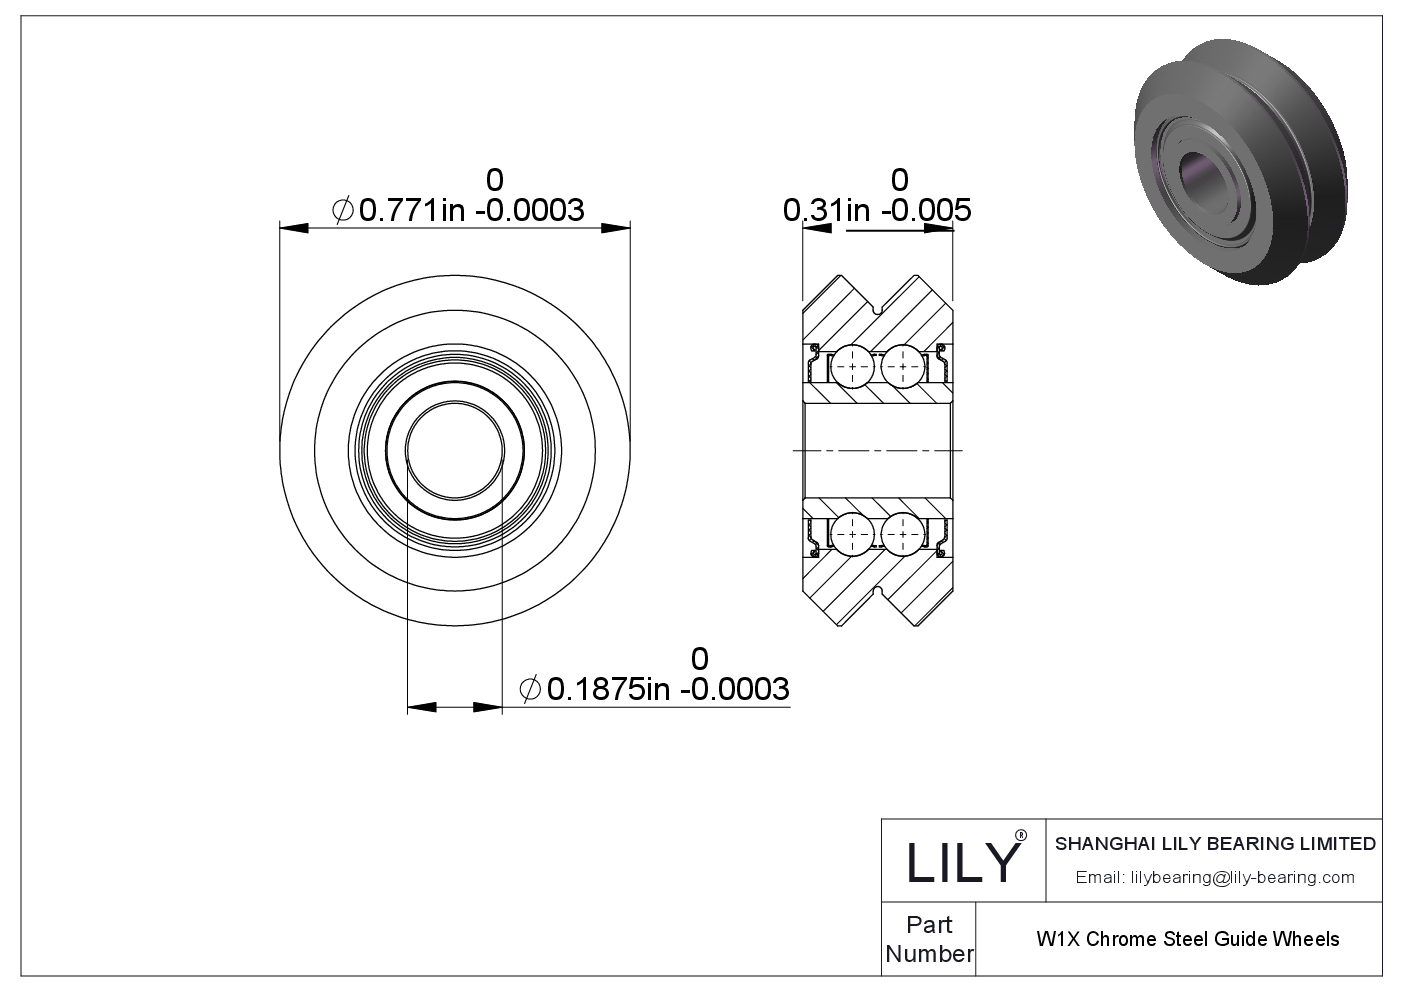 W1X Chrome Steel Guide Wheels cad drawing